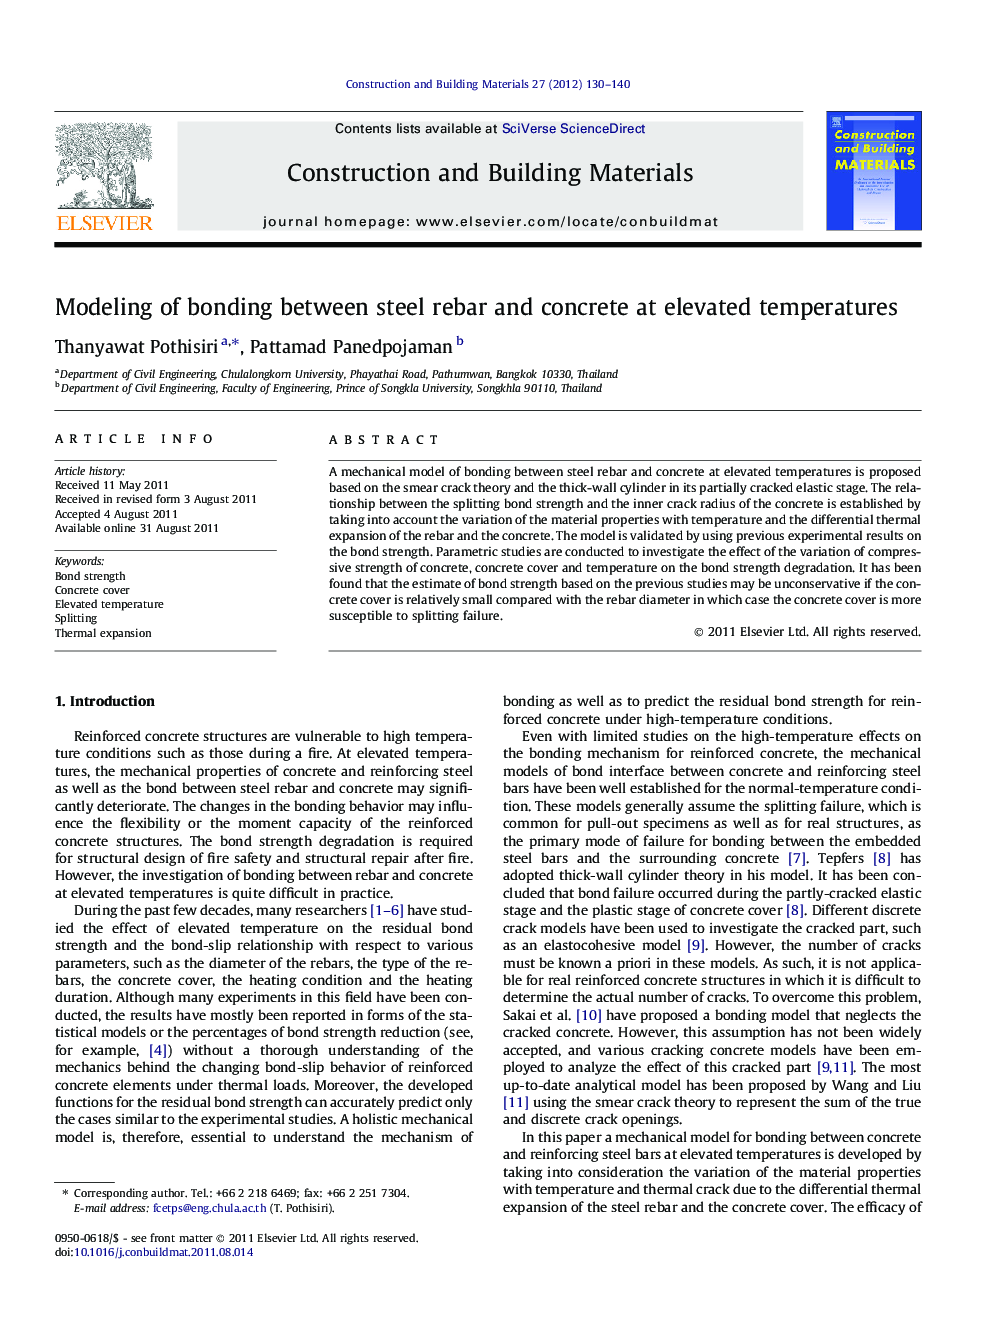 Modeling of bonding between steel rebar and concrete at elevated temperatures